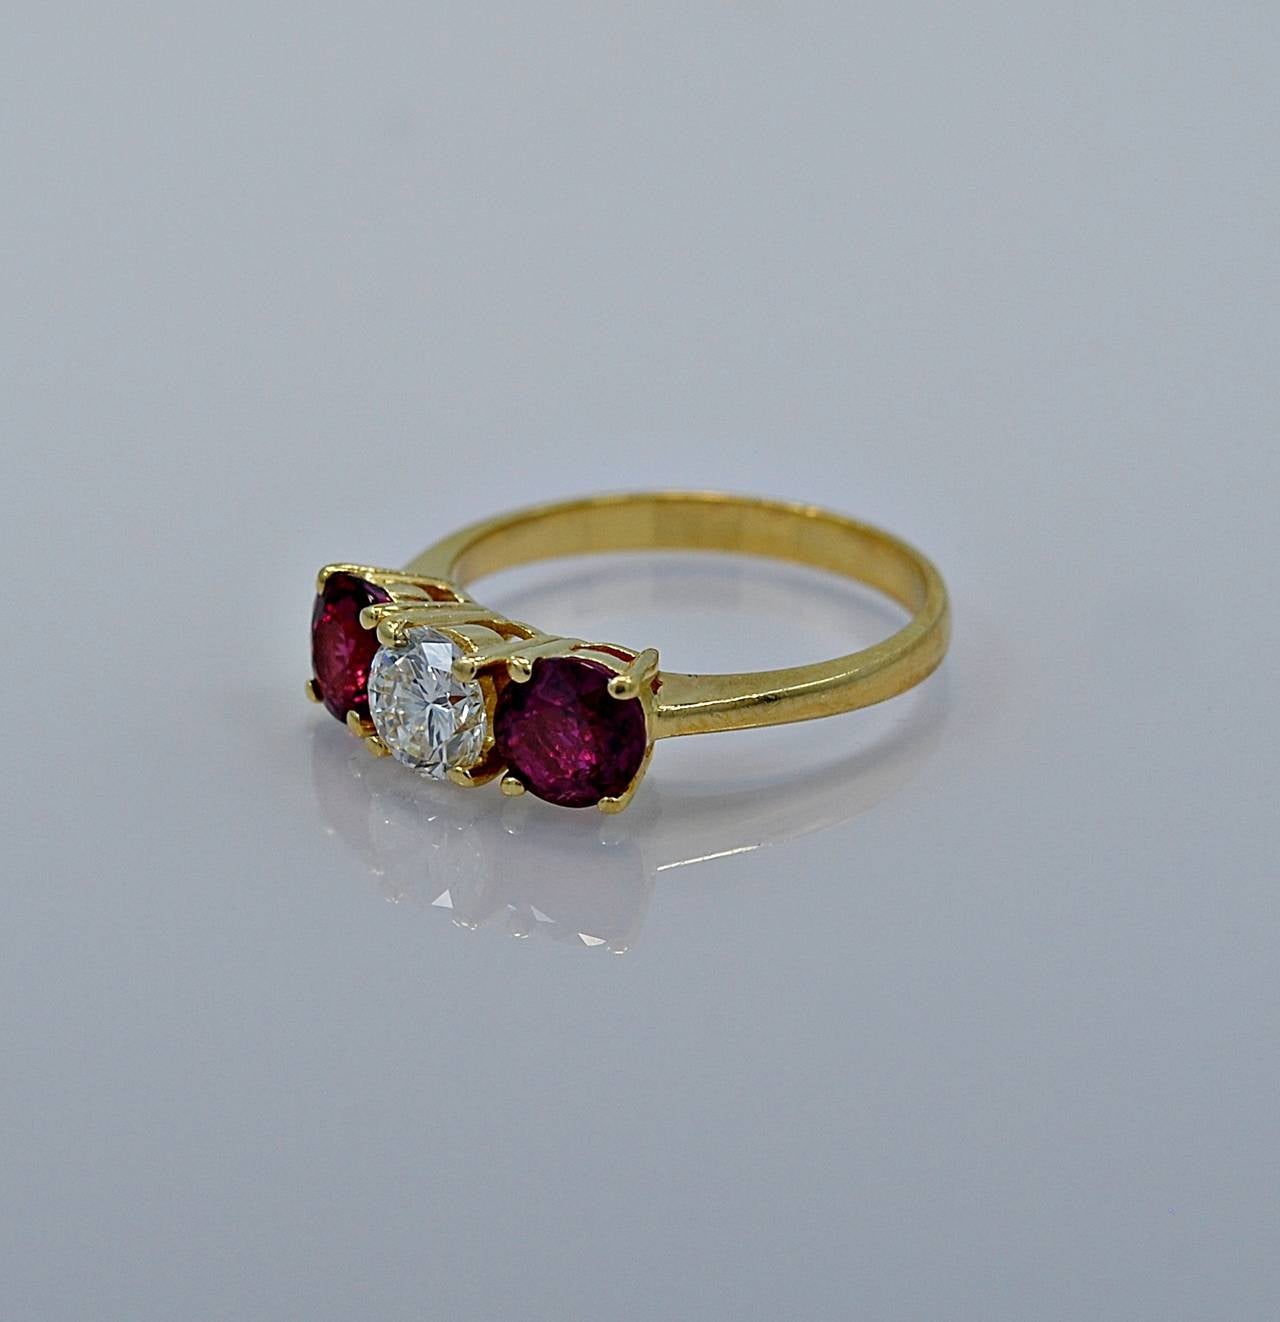 J35081

REASONABLE OFFERS CONSIDERED!

Timeless and classic! This Estate 1950's engagement ring features 1.30ct. apx. T.W. of natural rubies with a .65ct. apx. round brilliant center stone. The color is F and the clarity is VS1. This is an